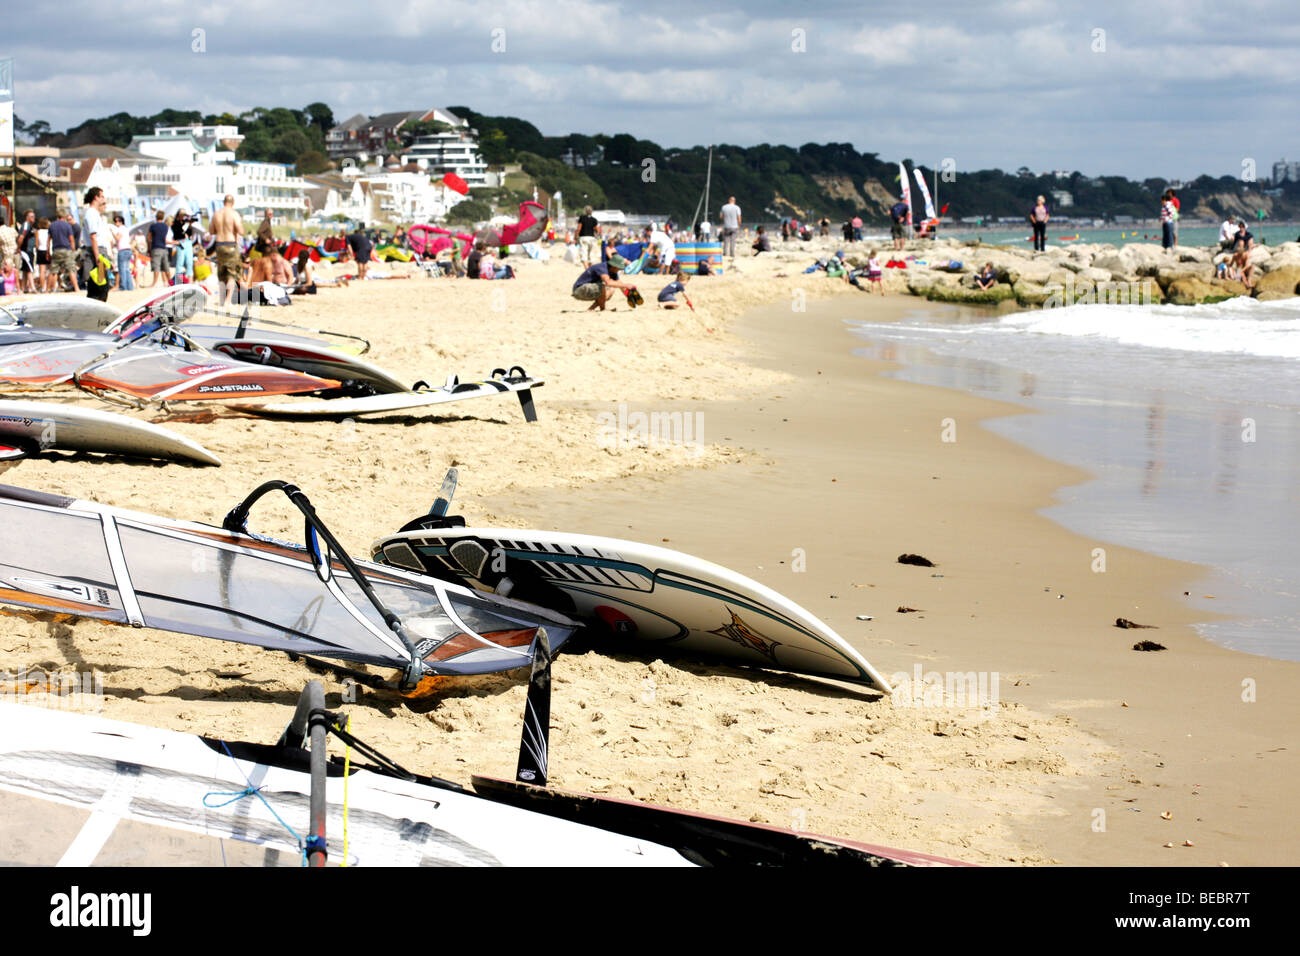 Colourful Windsurfing Boards And Sails Laying On A Sandy Beach Waiting To Be Used On The Shoreline Before An offshore Race Or Competition Stock Photo